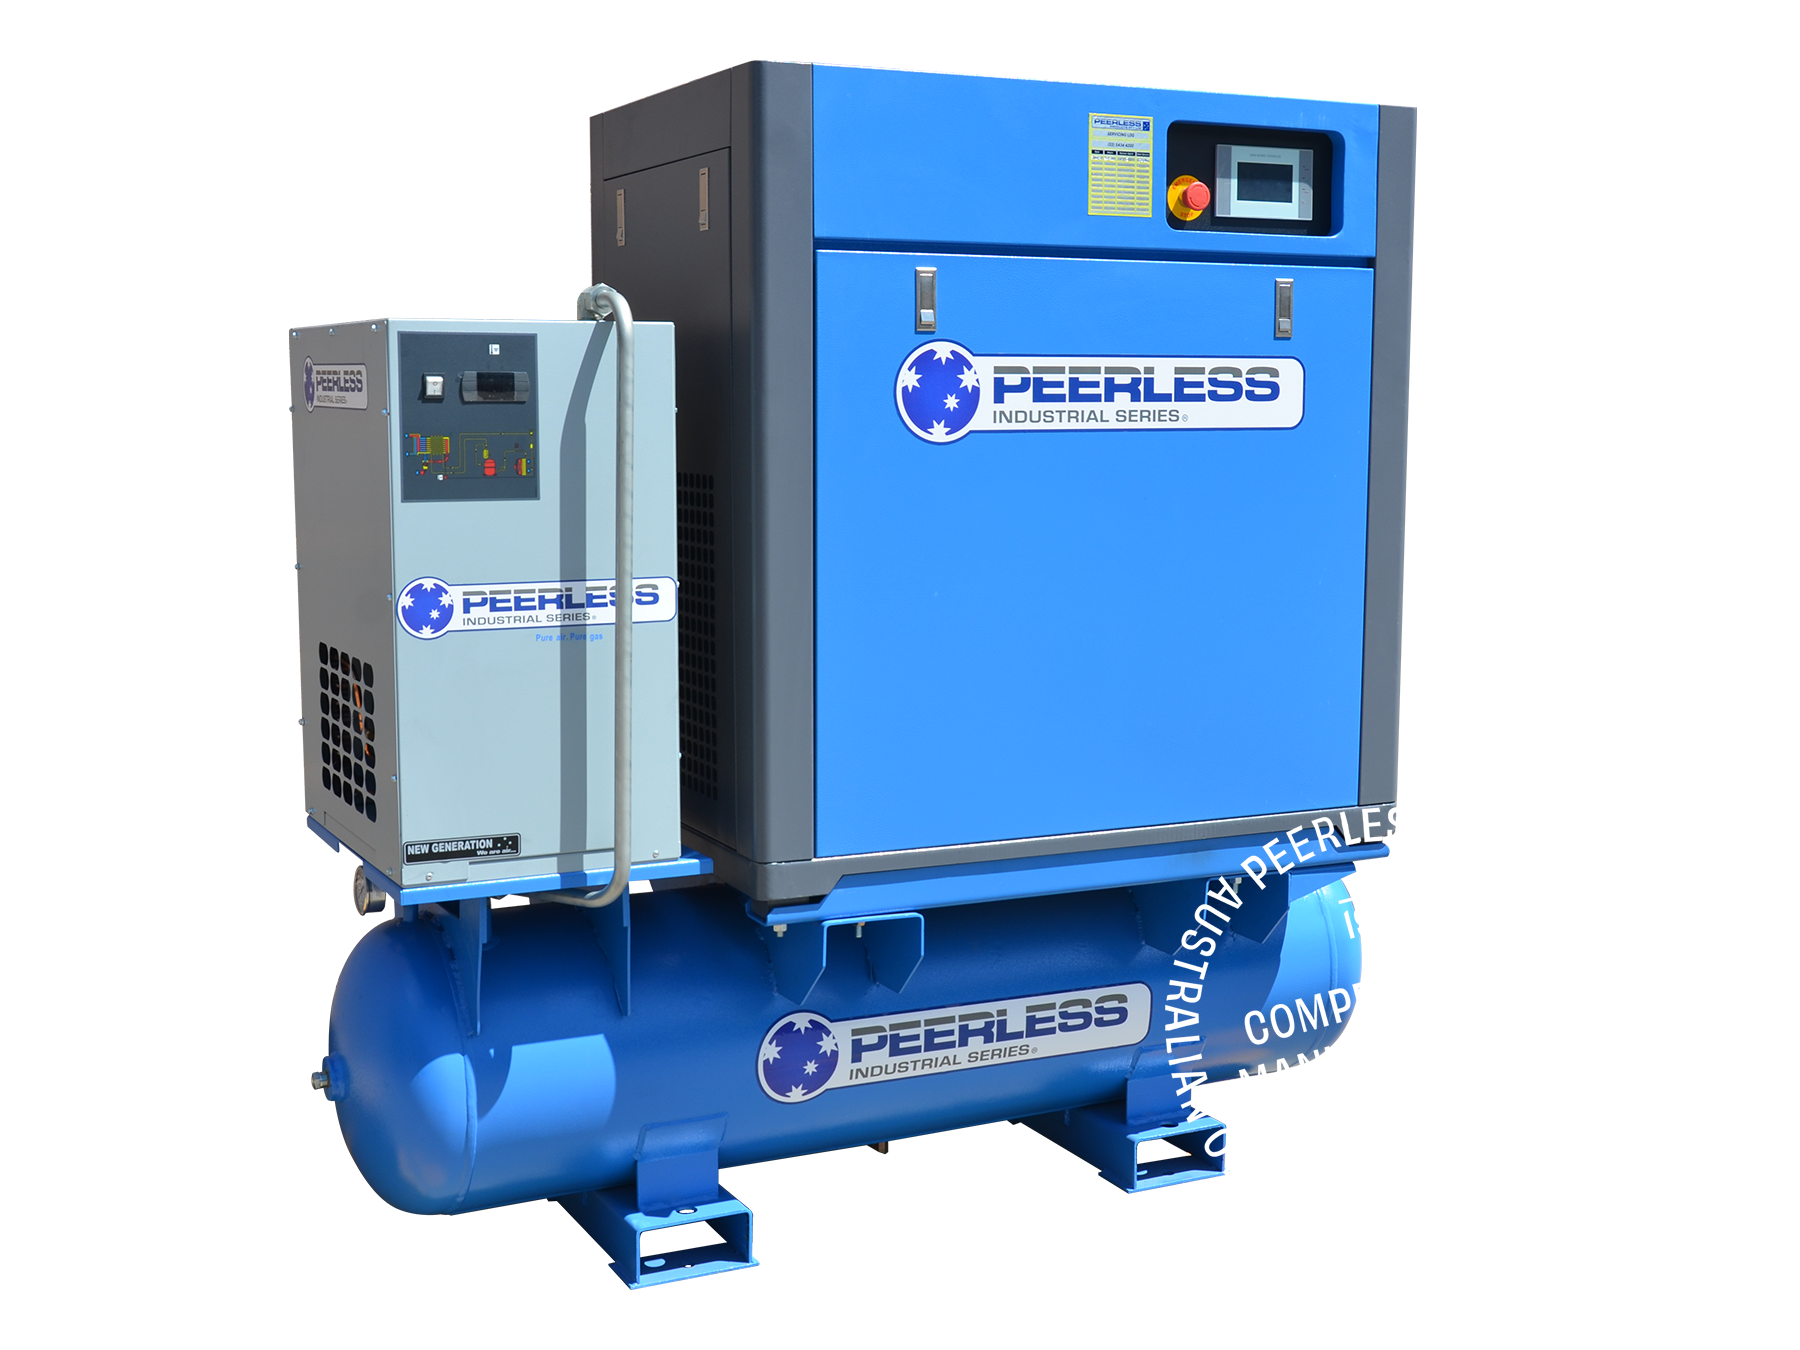 Rotary Screw Air Compressor with Variable Speed, Direct Drive, 20HP, 1840-2200LPM - HQD20VSHP-FF-8 by Peerless